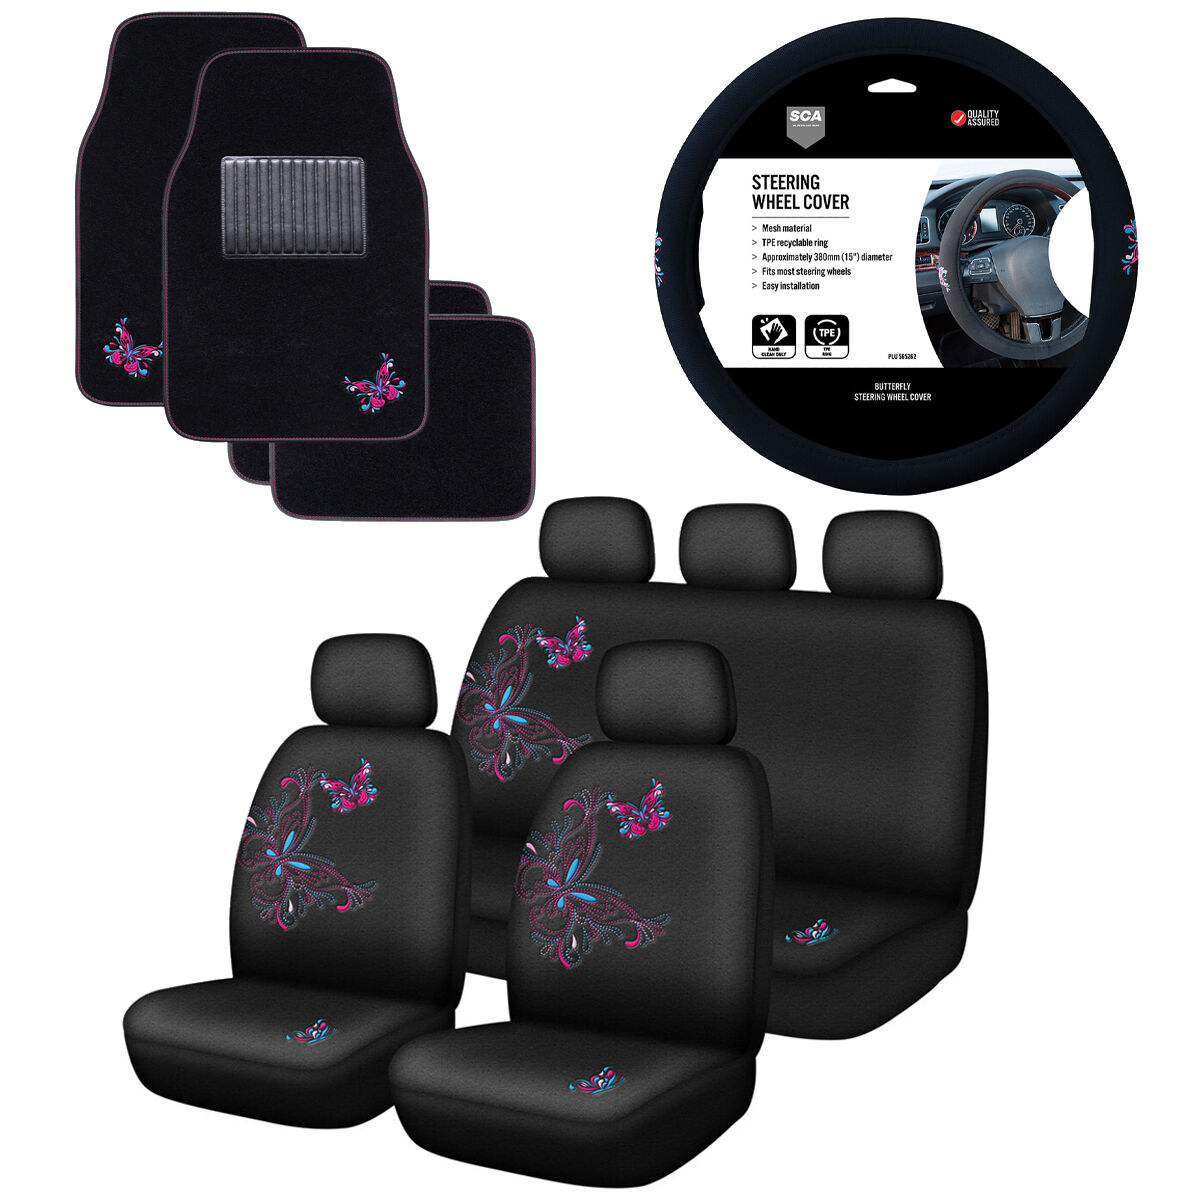 SCA Butterfly Seat Cover Set | Supercheap Auto